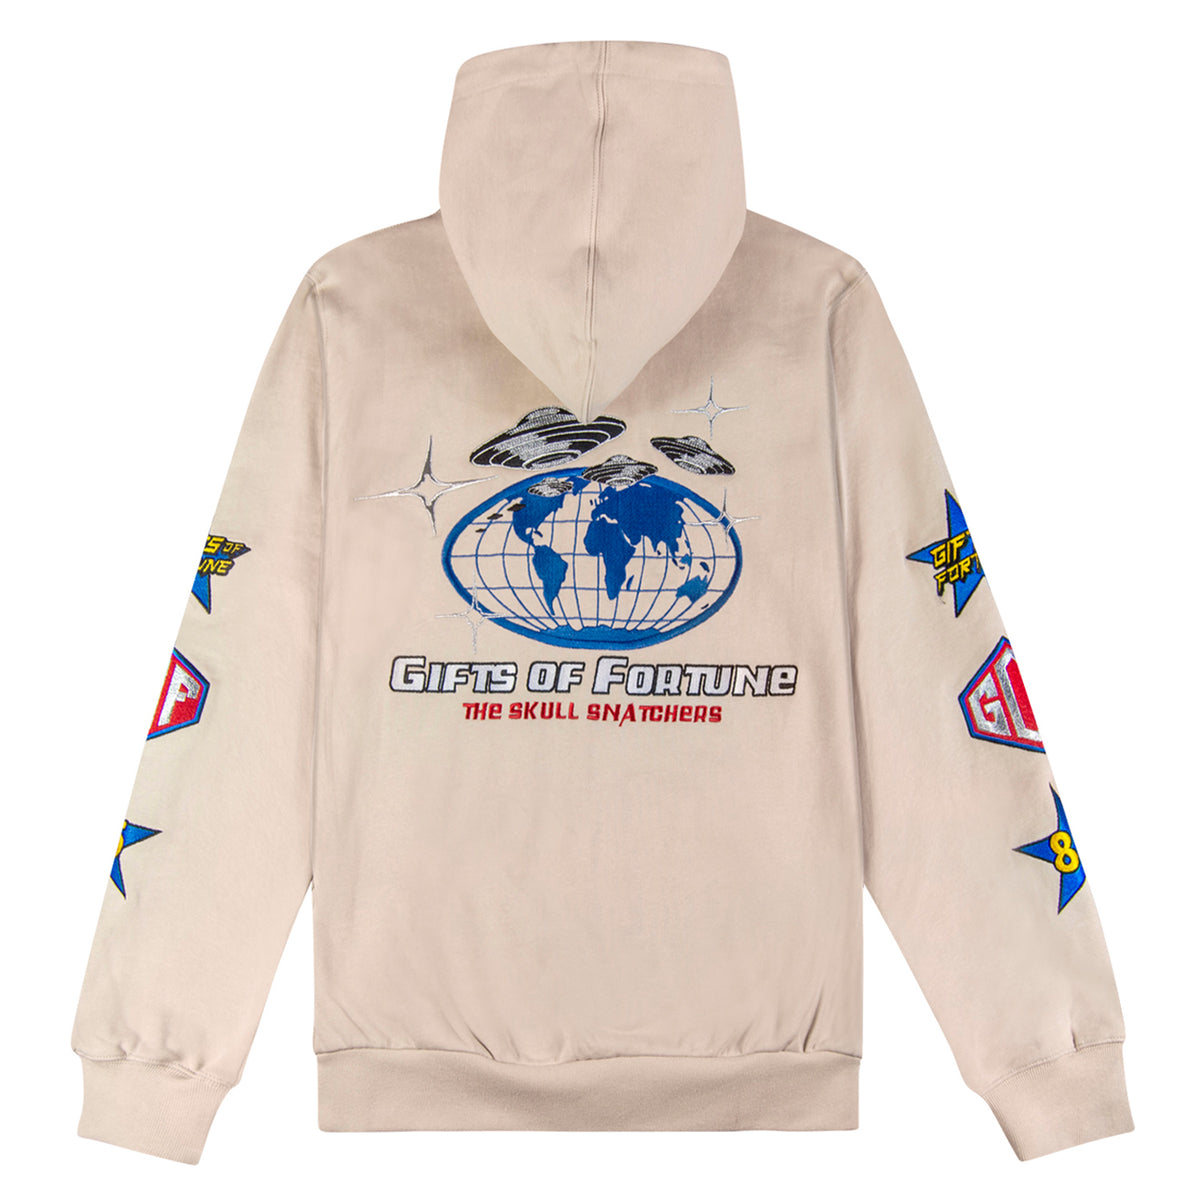 Out Of This World Hoodie | Tan